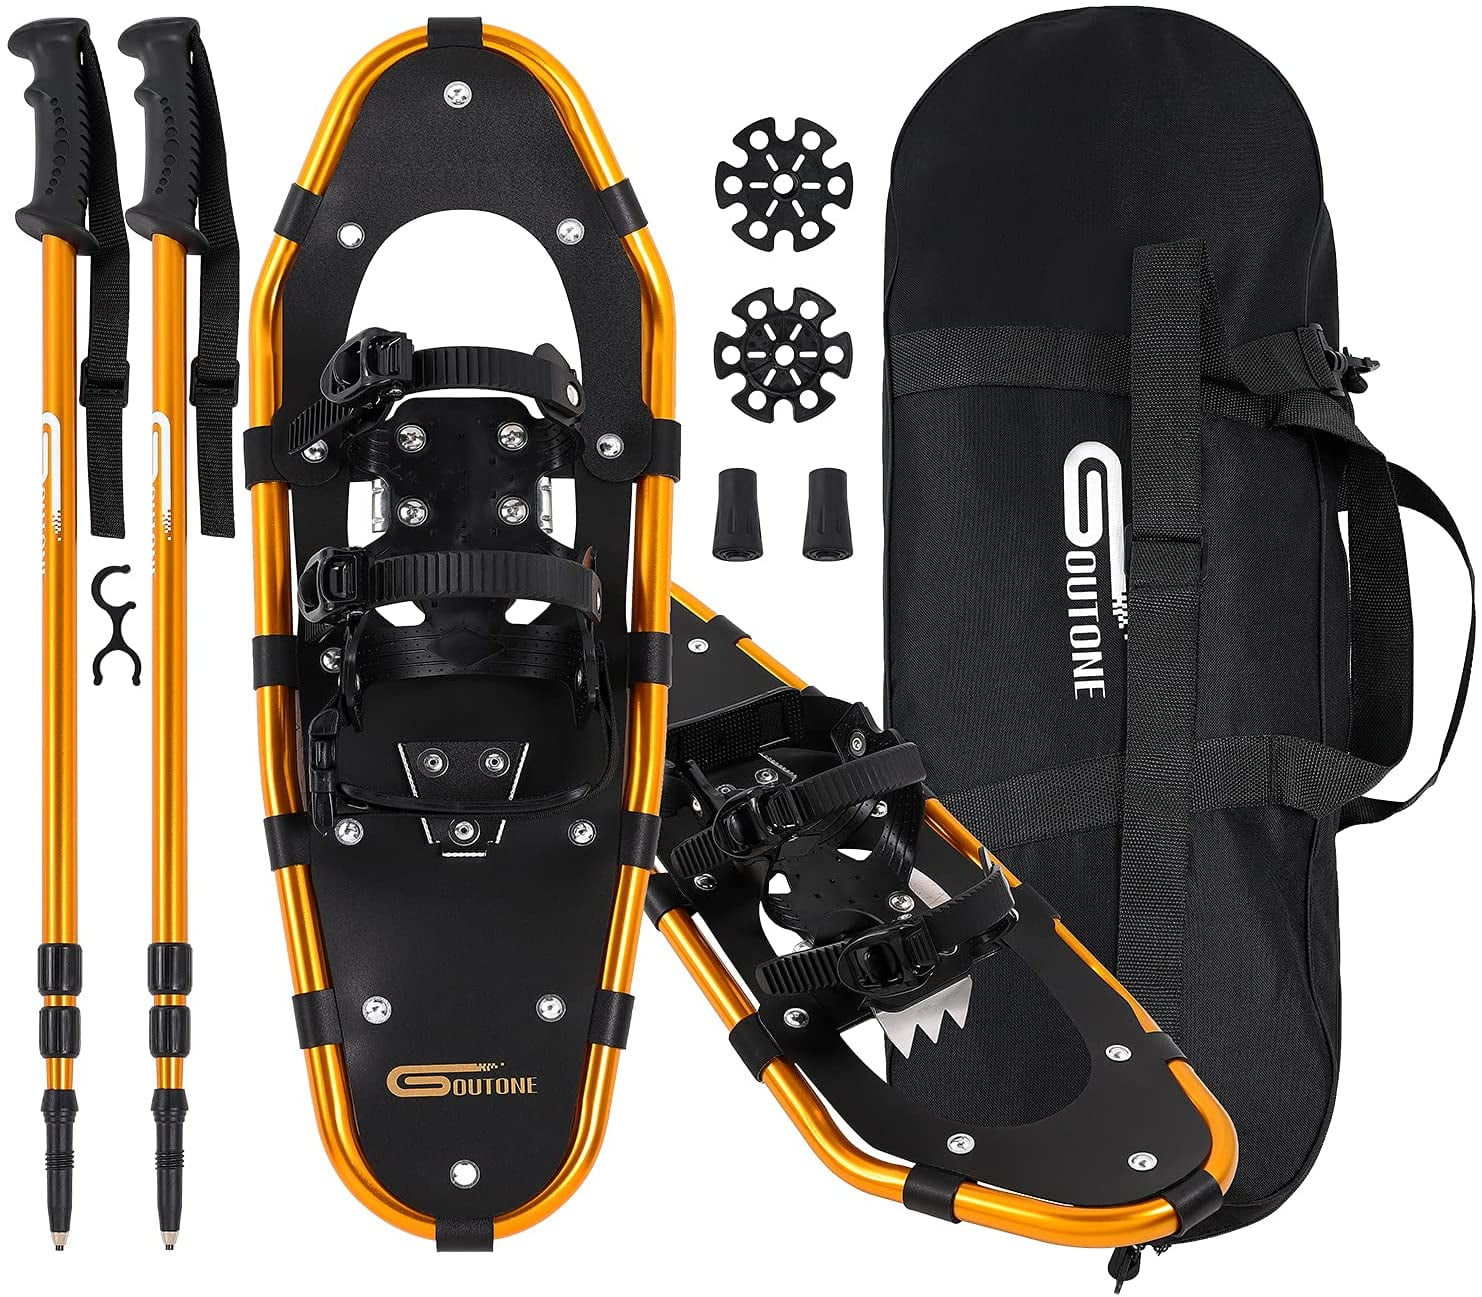 Suitable for Adult Men and Women Outdoor Activities Adjustable Aluminum Snow Shoes Shoe Size: 27In-29In,27in Unisex Snowshoes/Snowboards 